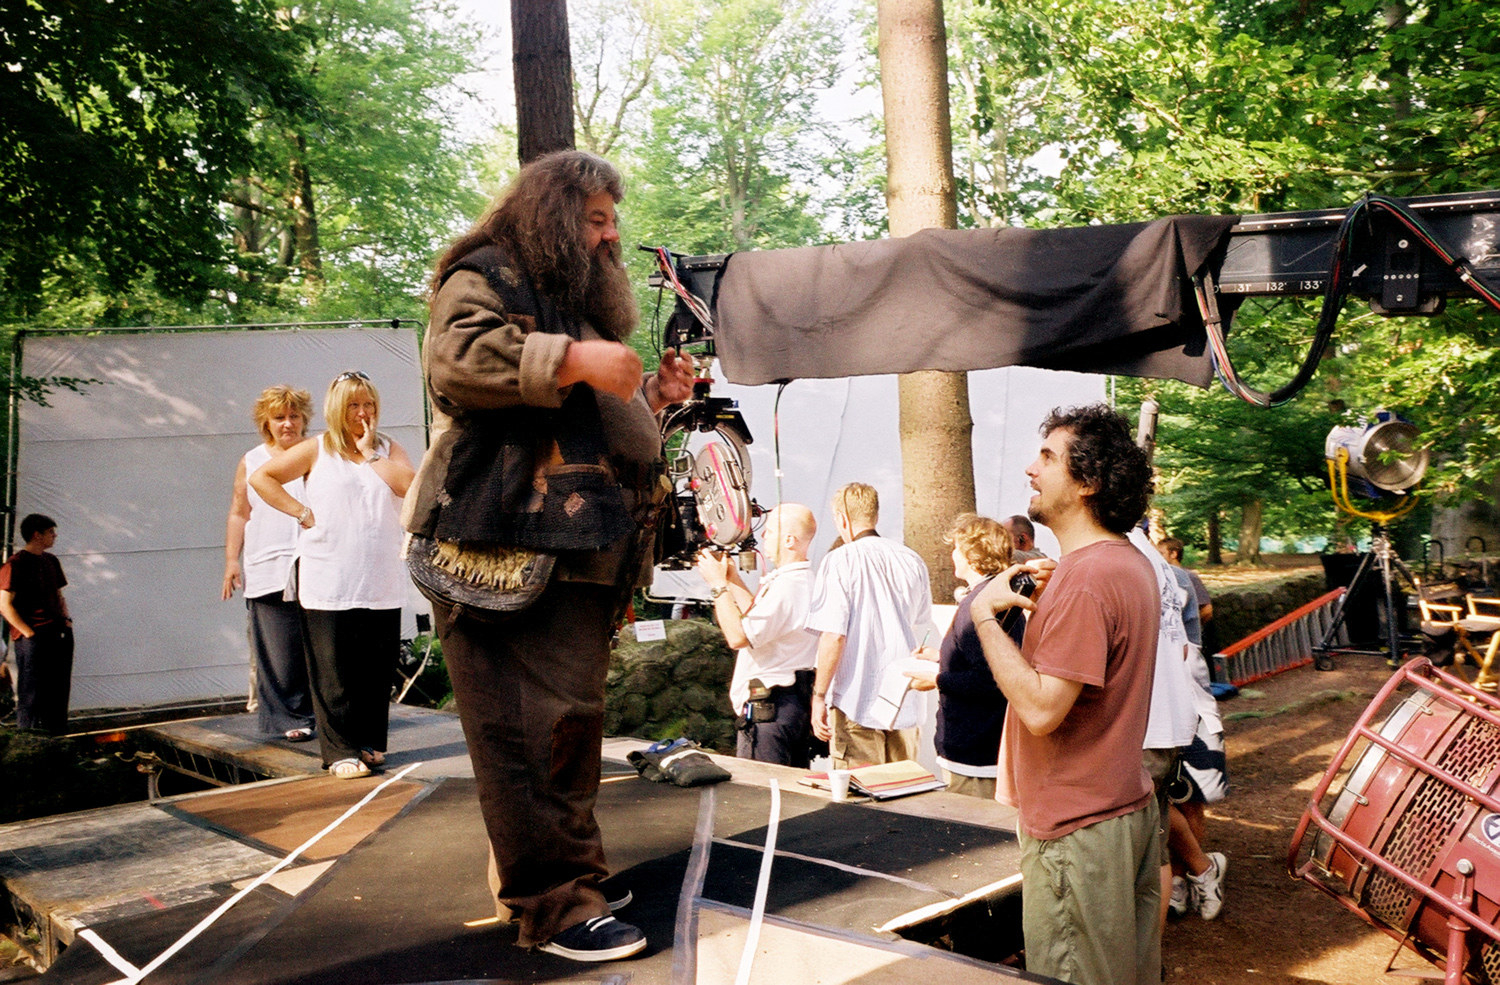 Robbie Coltrane and director Alfonso Cuaron on set